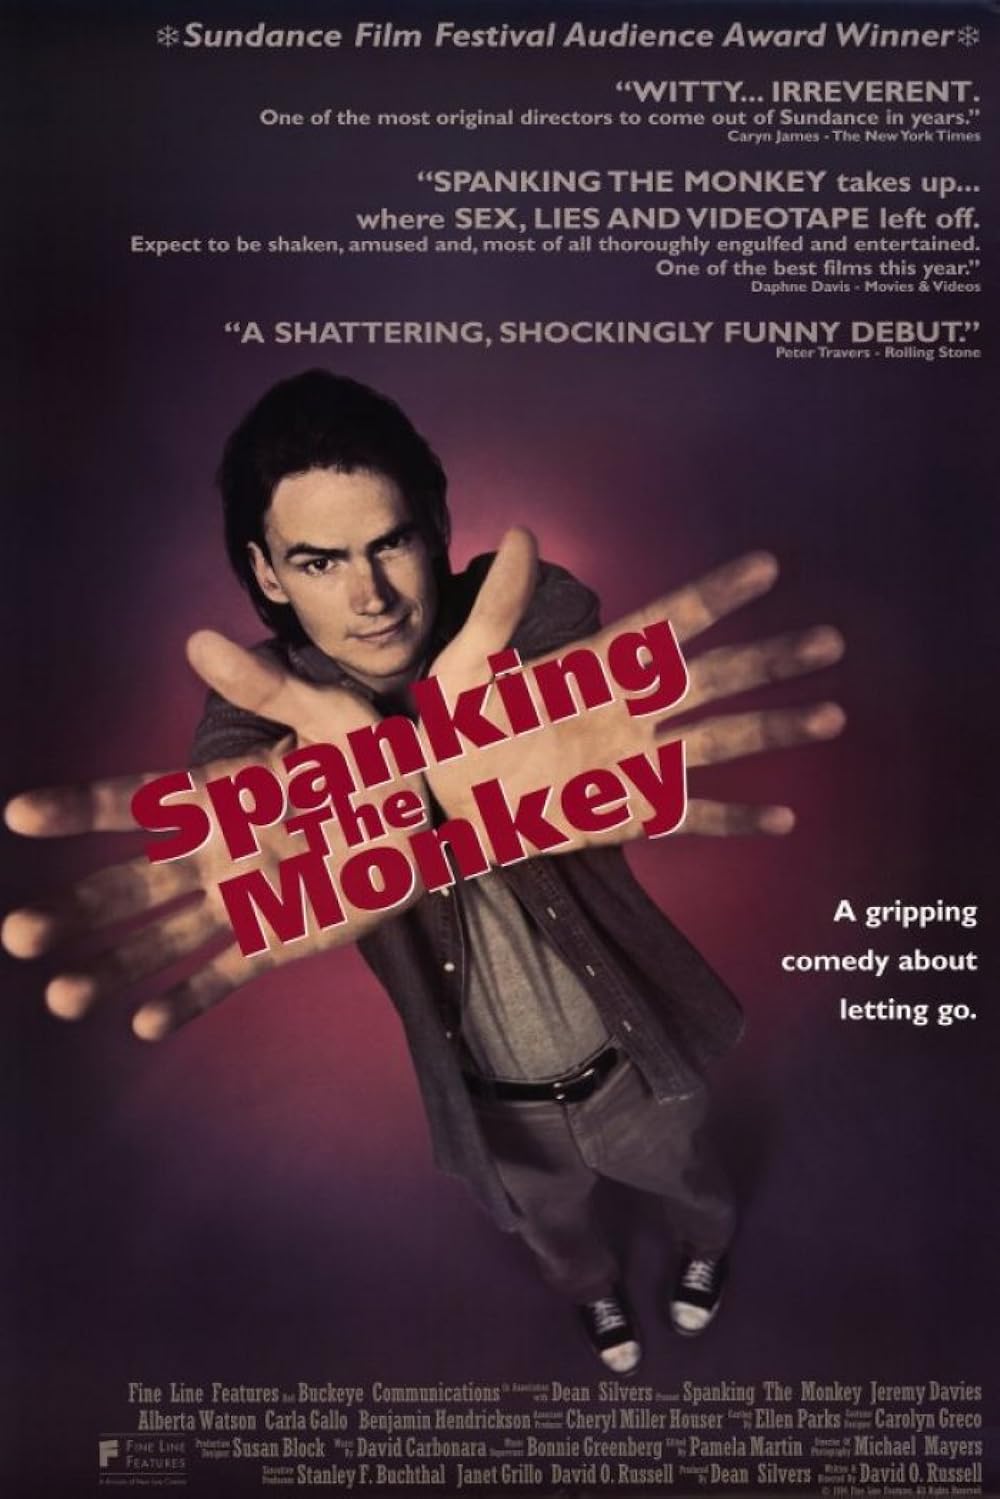 Best of Spanking in the movie